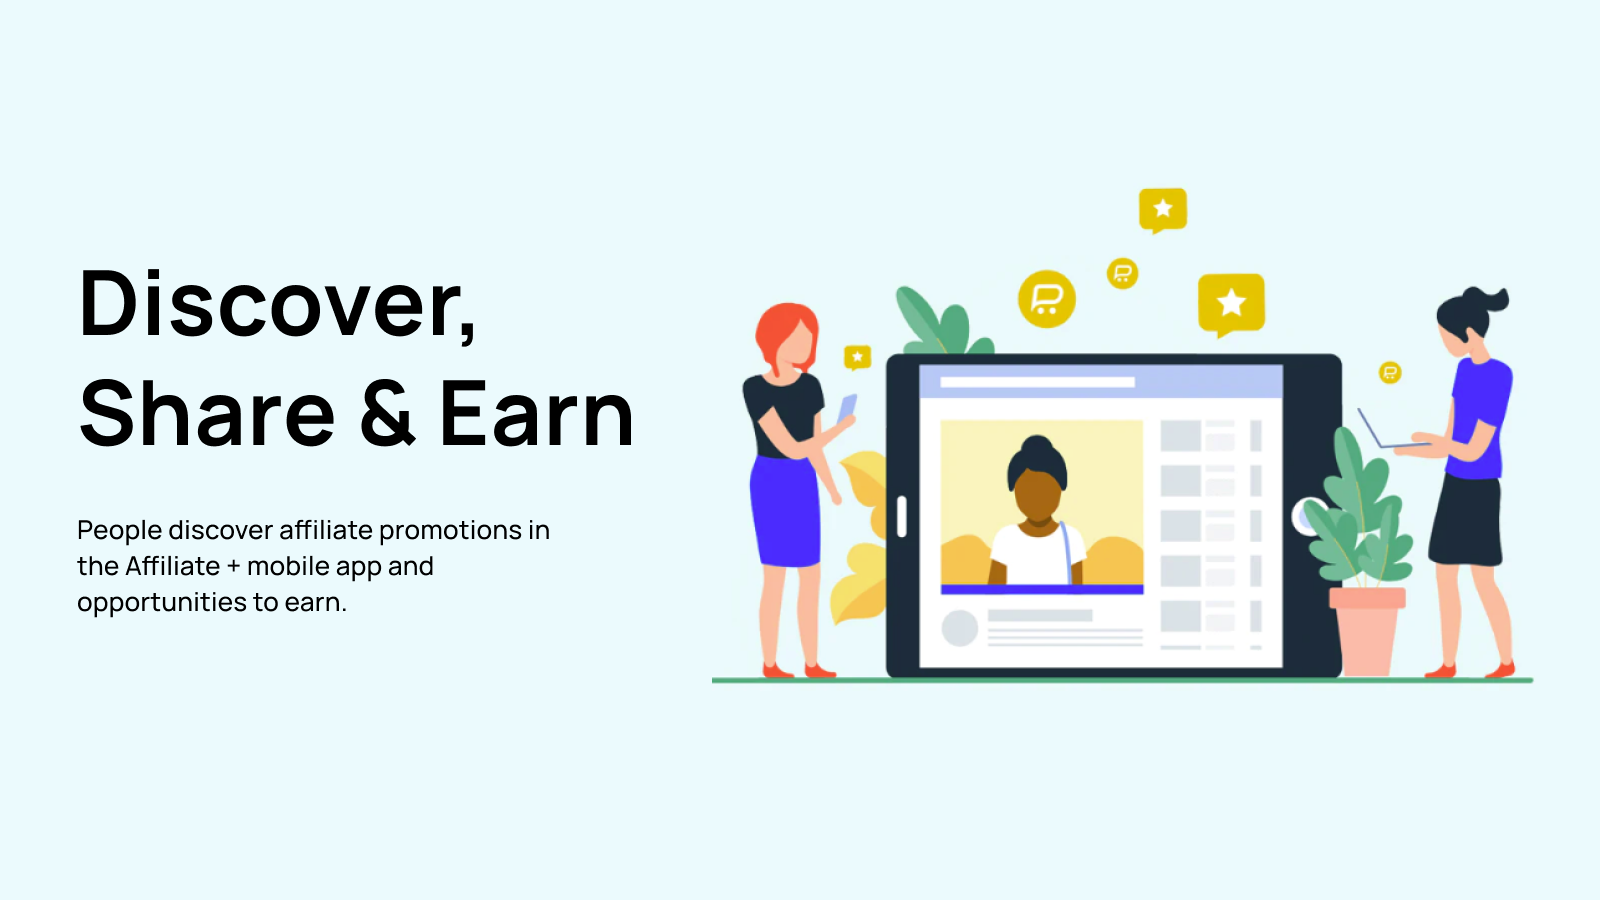 Discover, Share & Earn